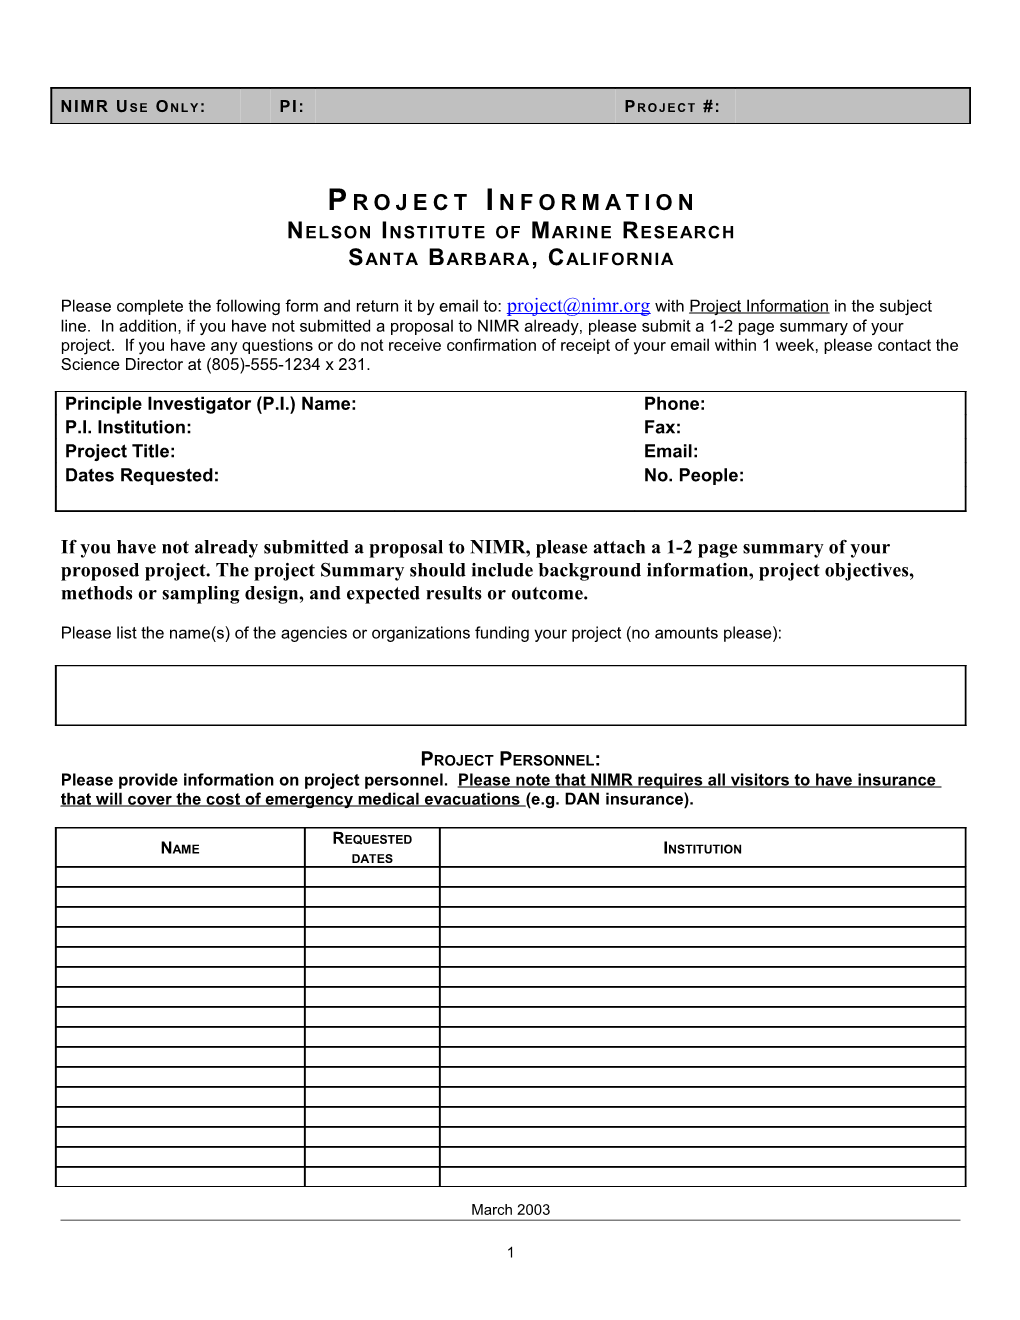 Please Complete the Following Form and Return It to the Following Address